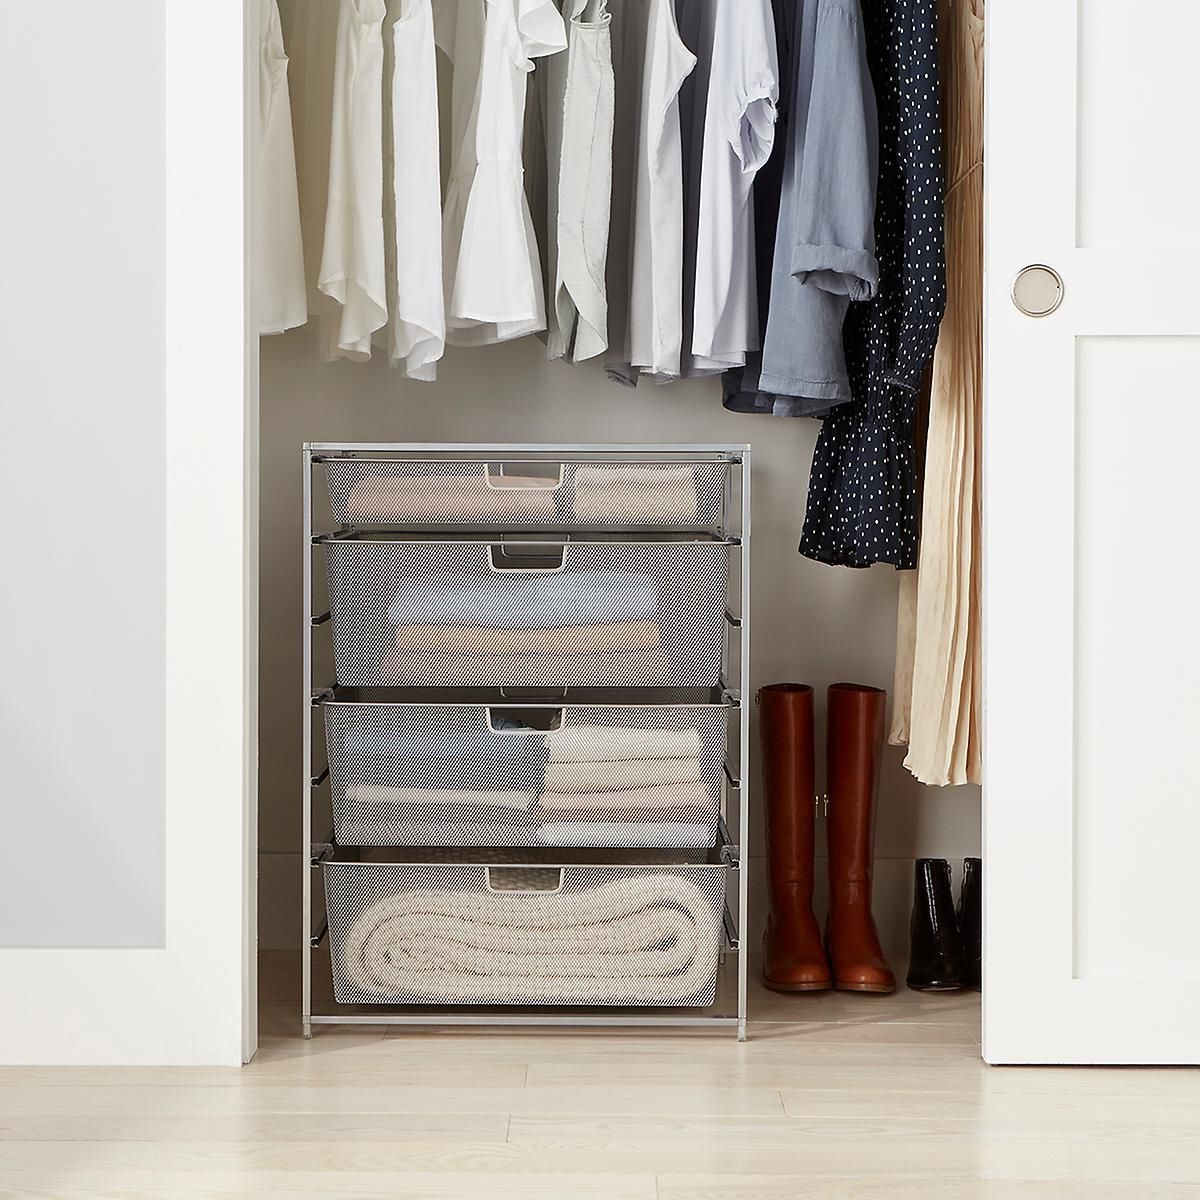 How To Organize Closet Without Shelves